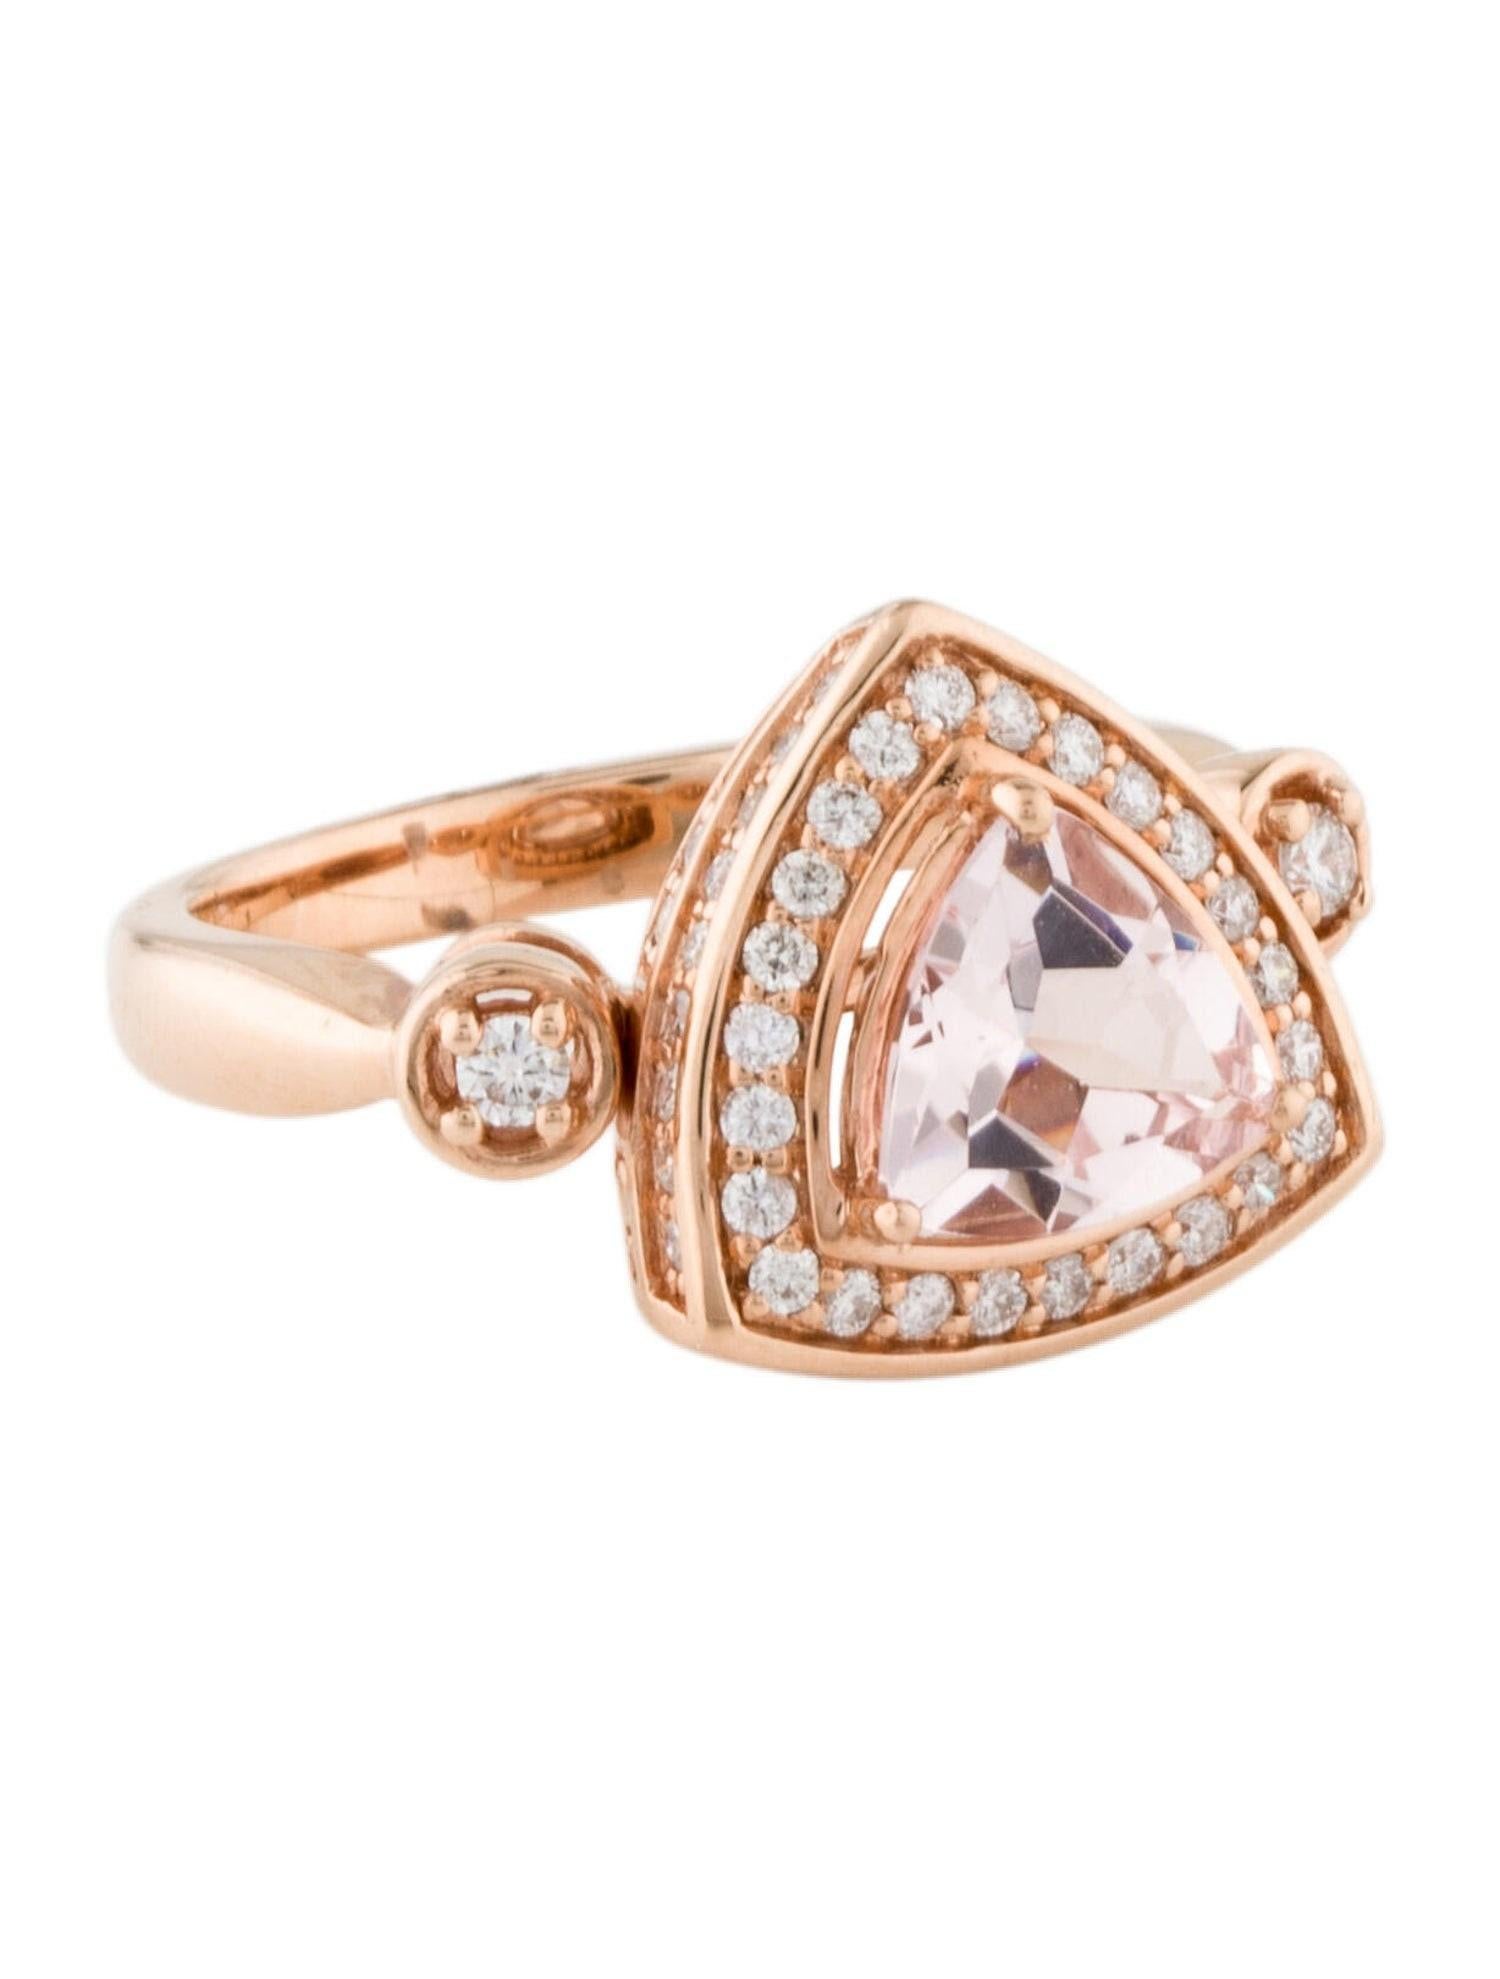 This is a gorgeous natural morganite and diamond halo vintage ring set in solid 14K rose gold. The natural trillion cut 1.29 carat morganite has an excellent peachy pink color and is surrounded by a halo of round-cut white diamonds. The ring is